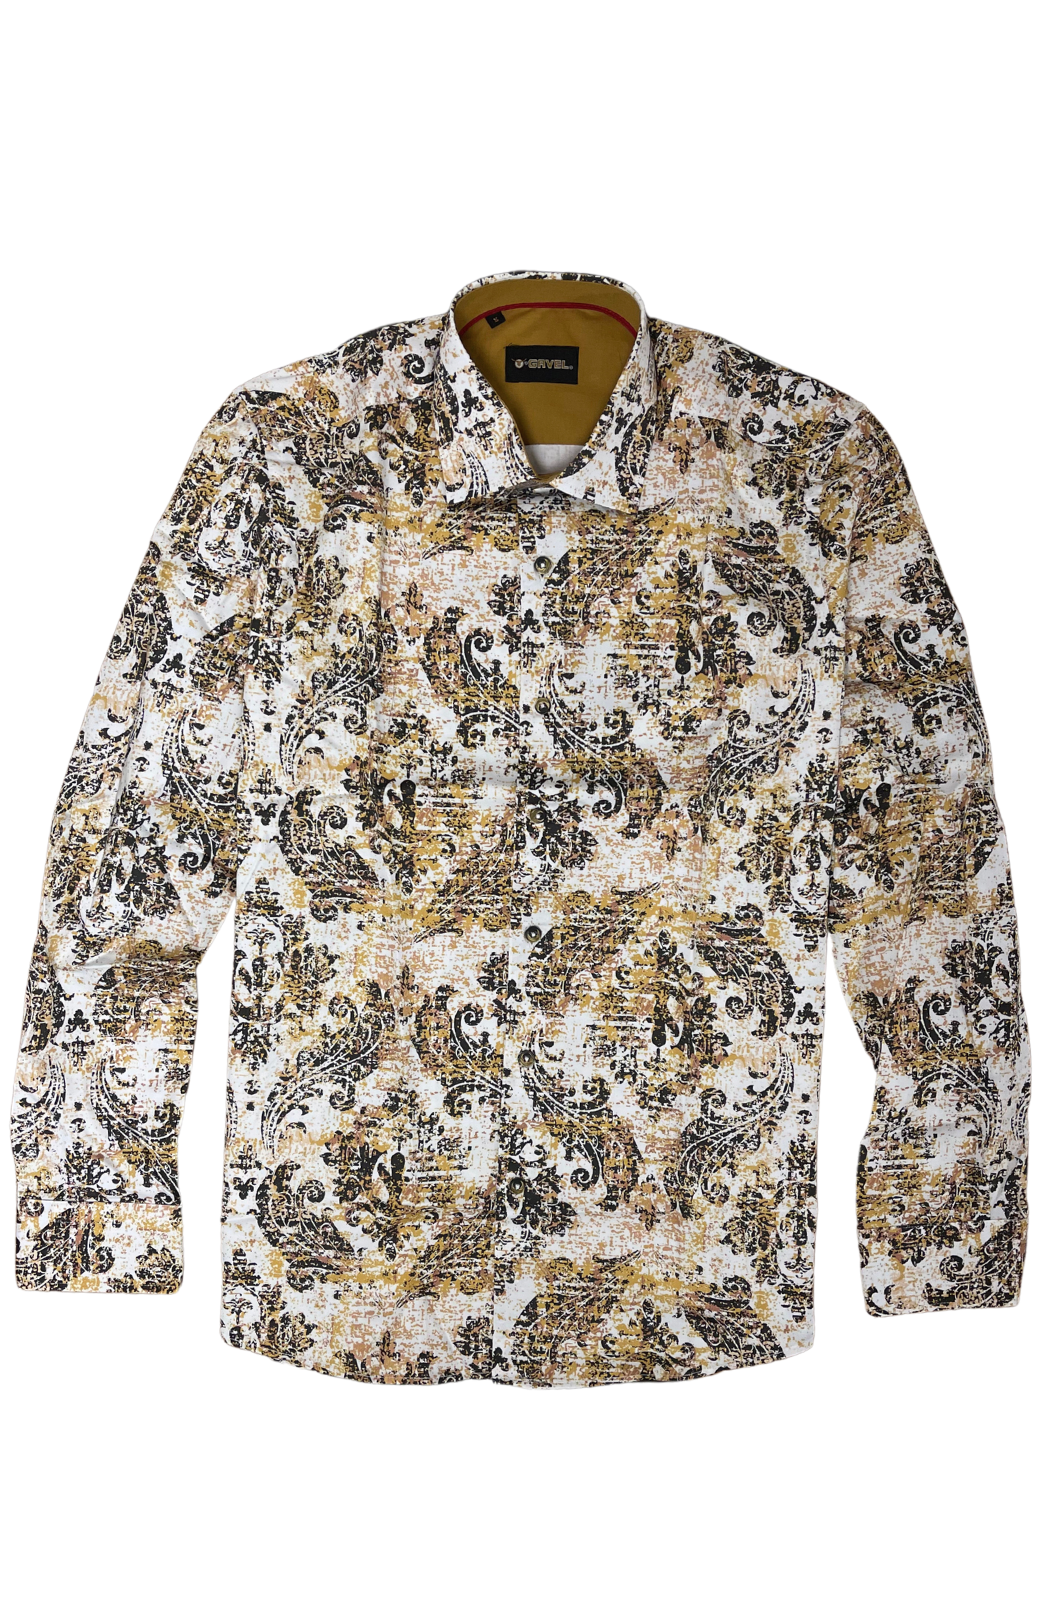 Men's RODEO WESTERN COUNTRY FASHION BROWN WHITE PAISLEY BUTTON UP Shirt Lucky Cowboy